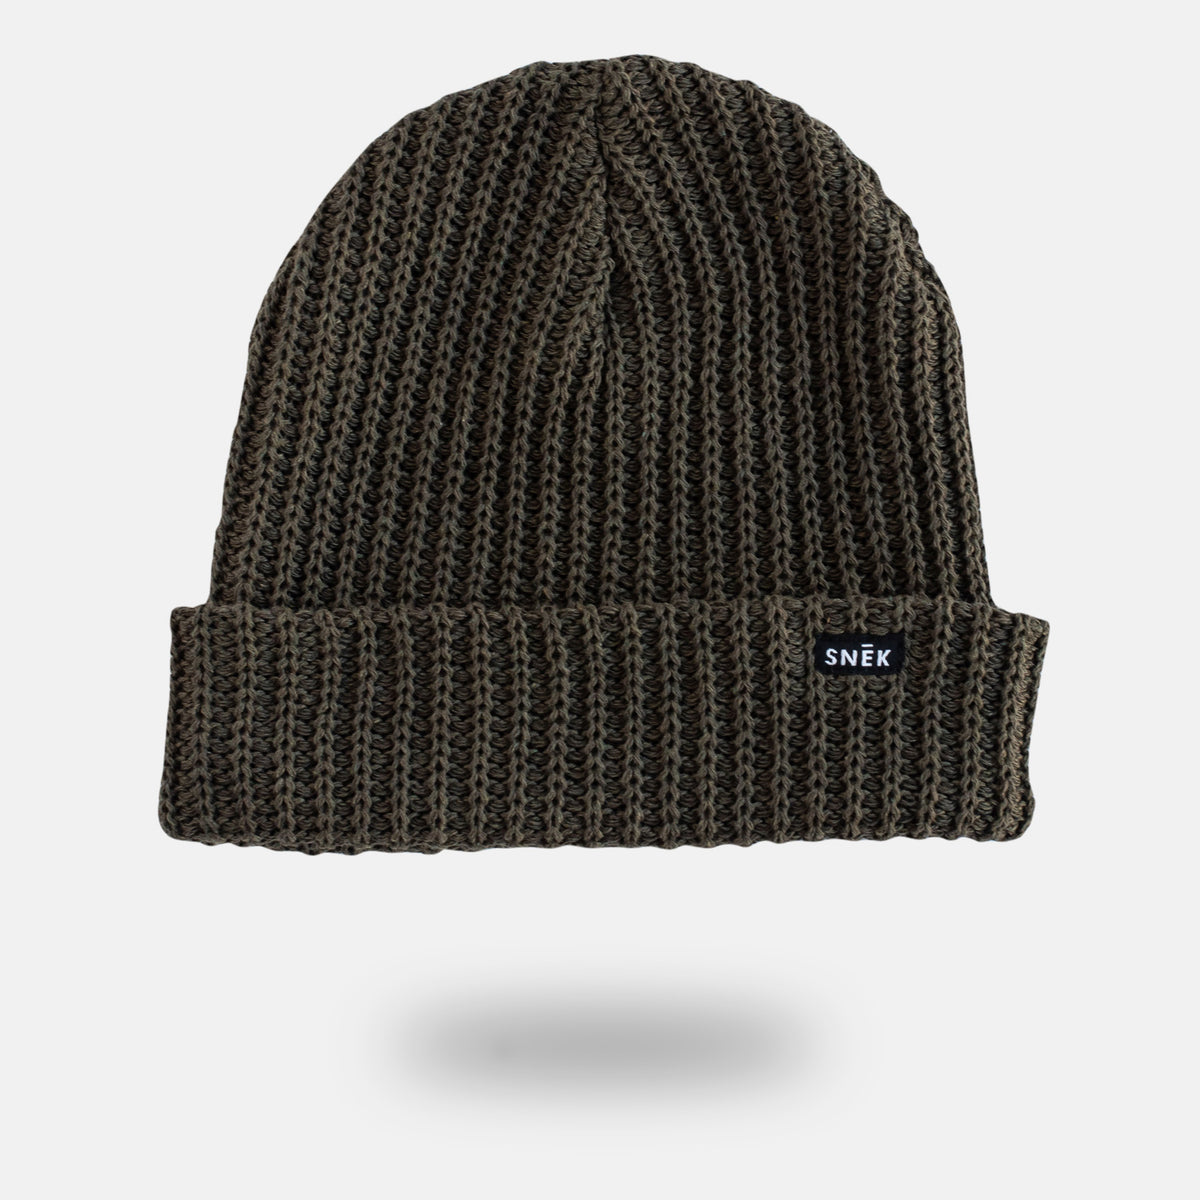 Recycled Knit Watch Cap Beanie